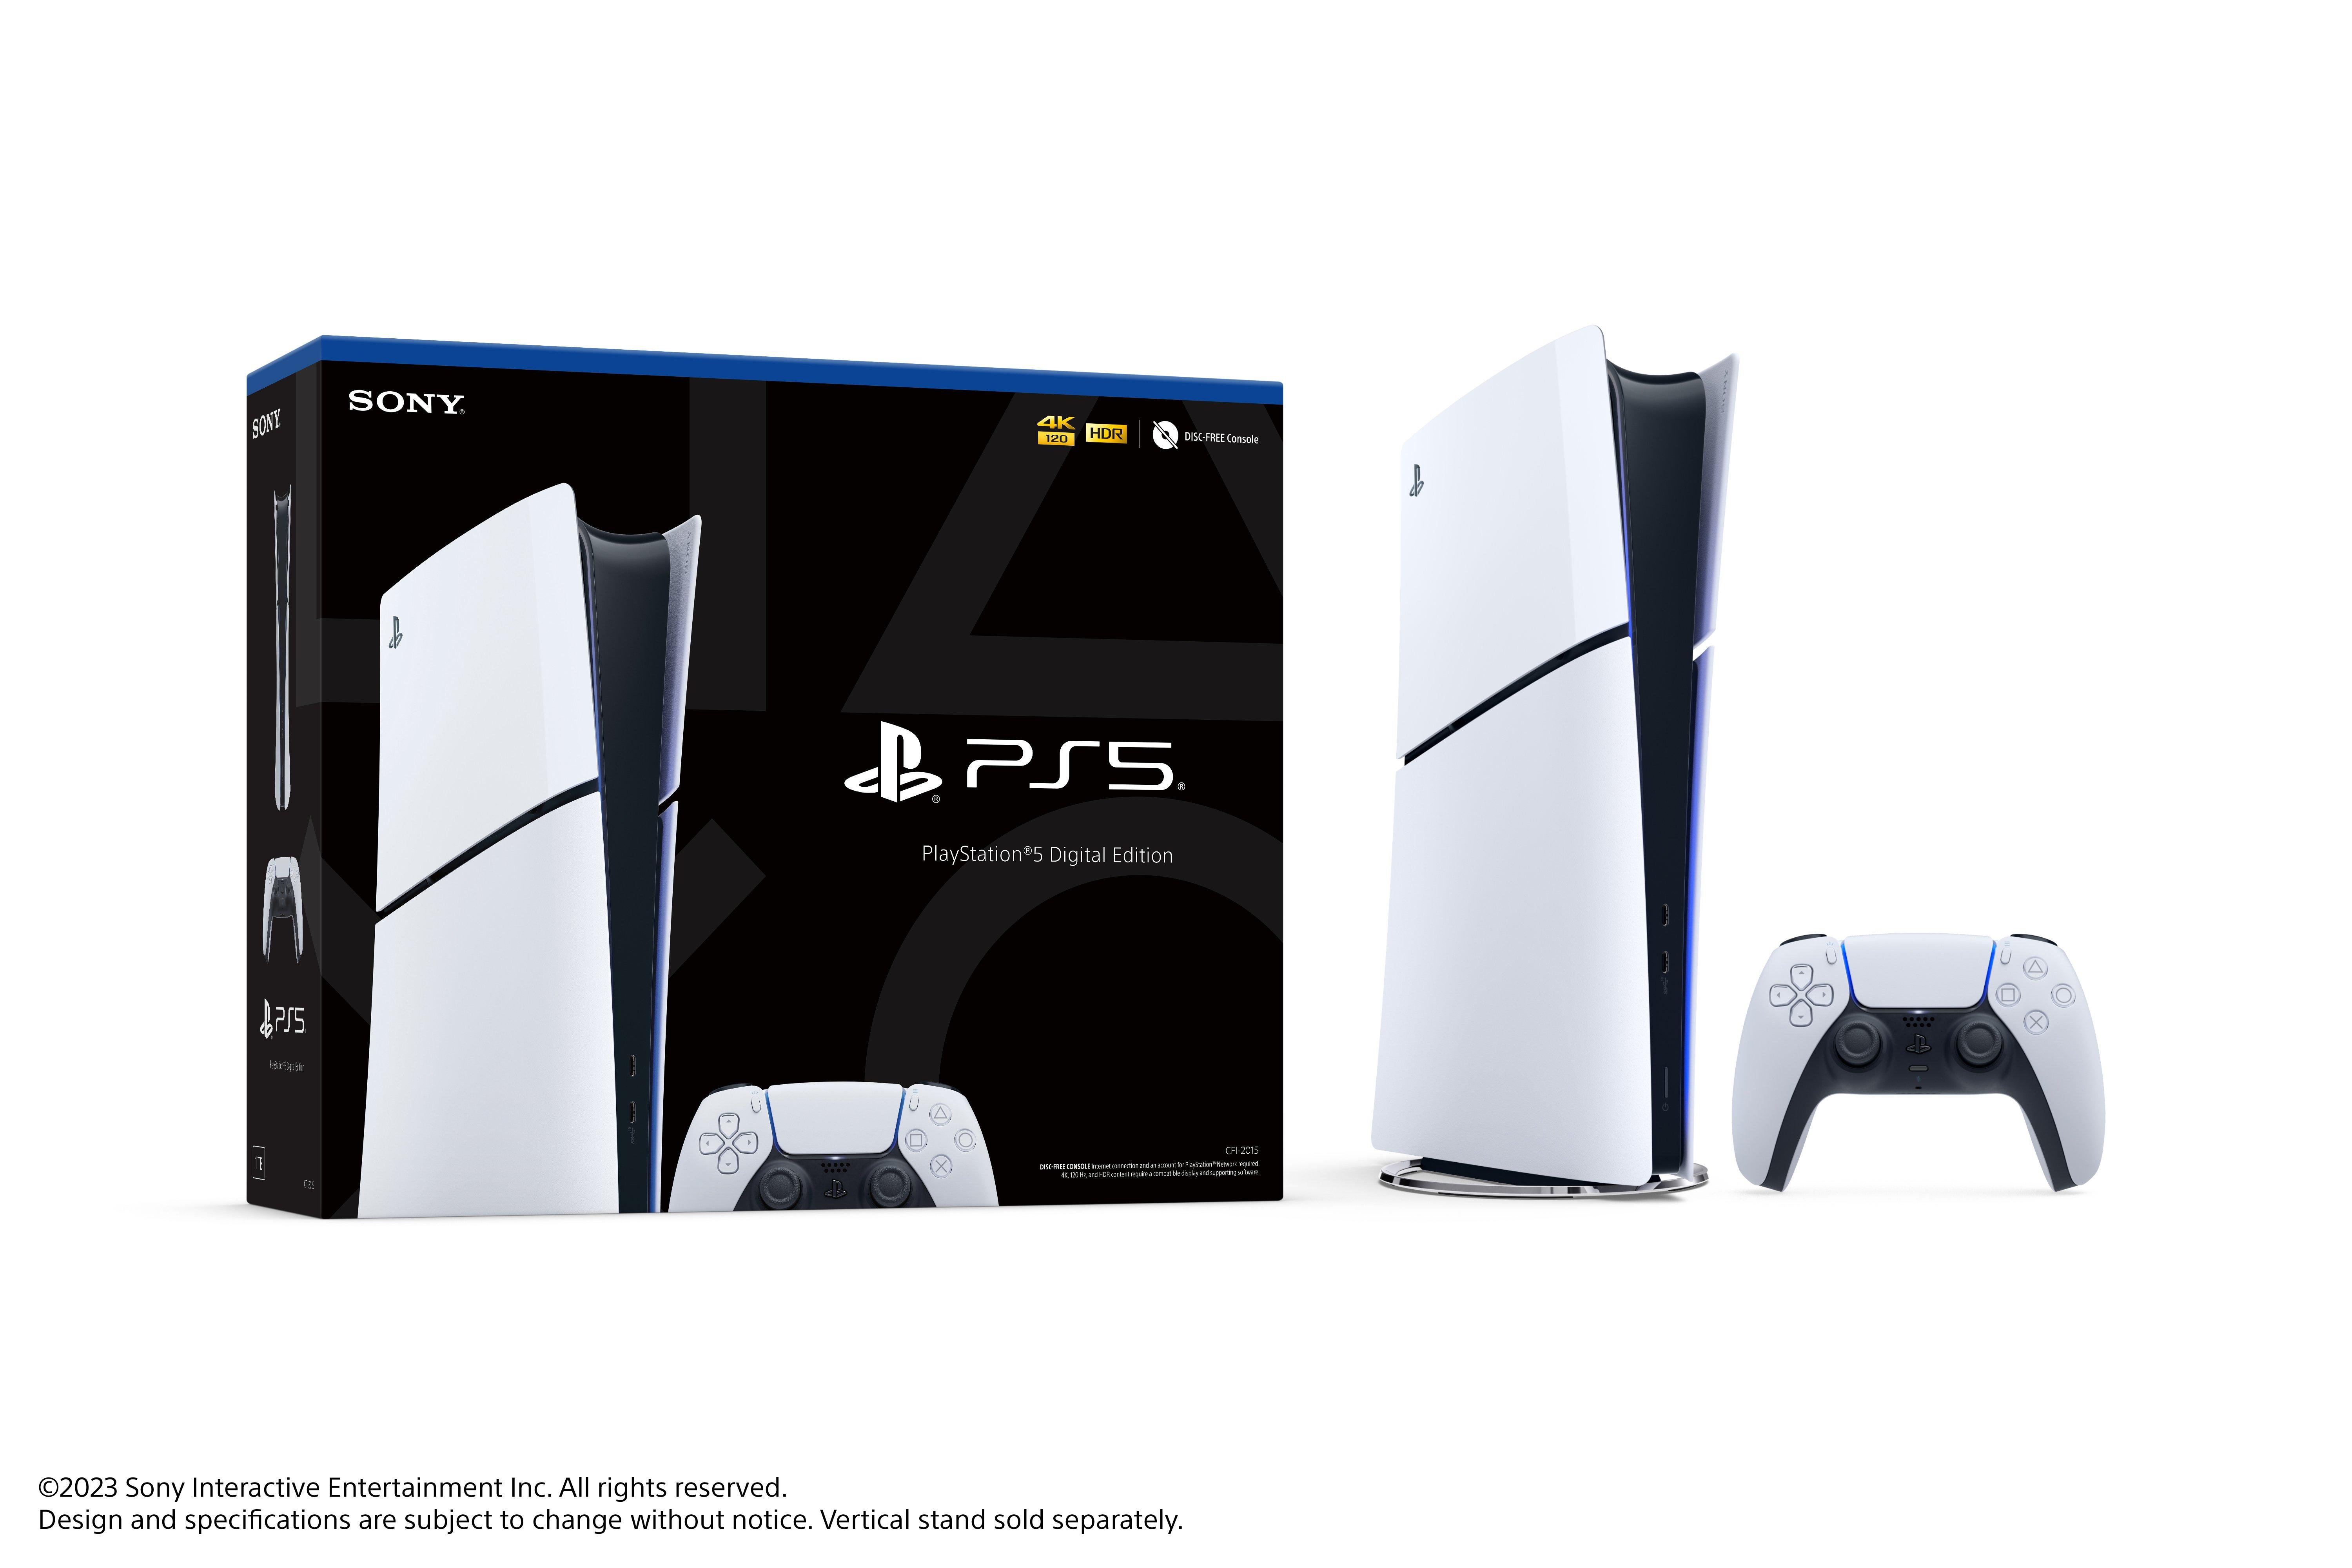 Weighty PS5 console and accessories reveal subtle design details